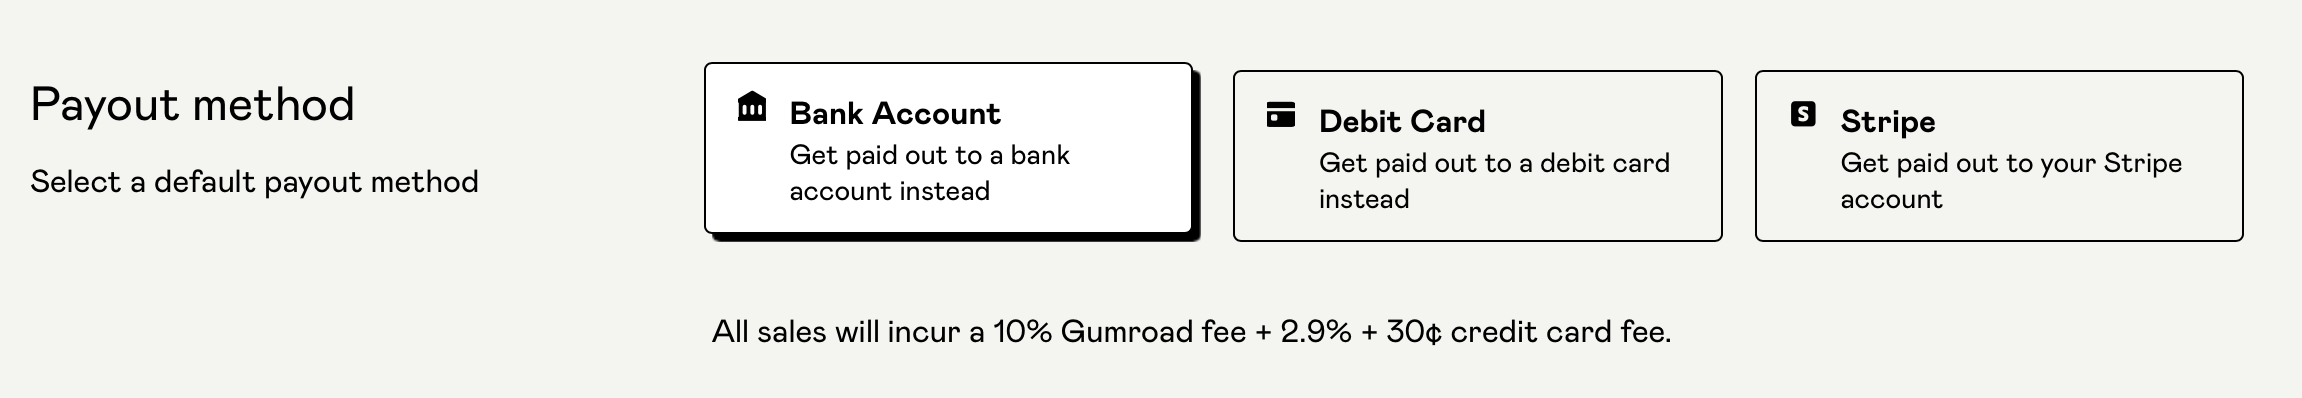 Gumroad payouts with bank or debit card